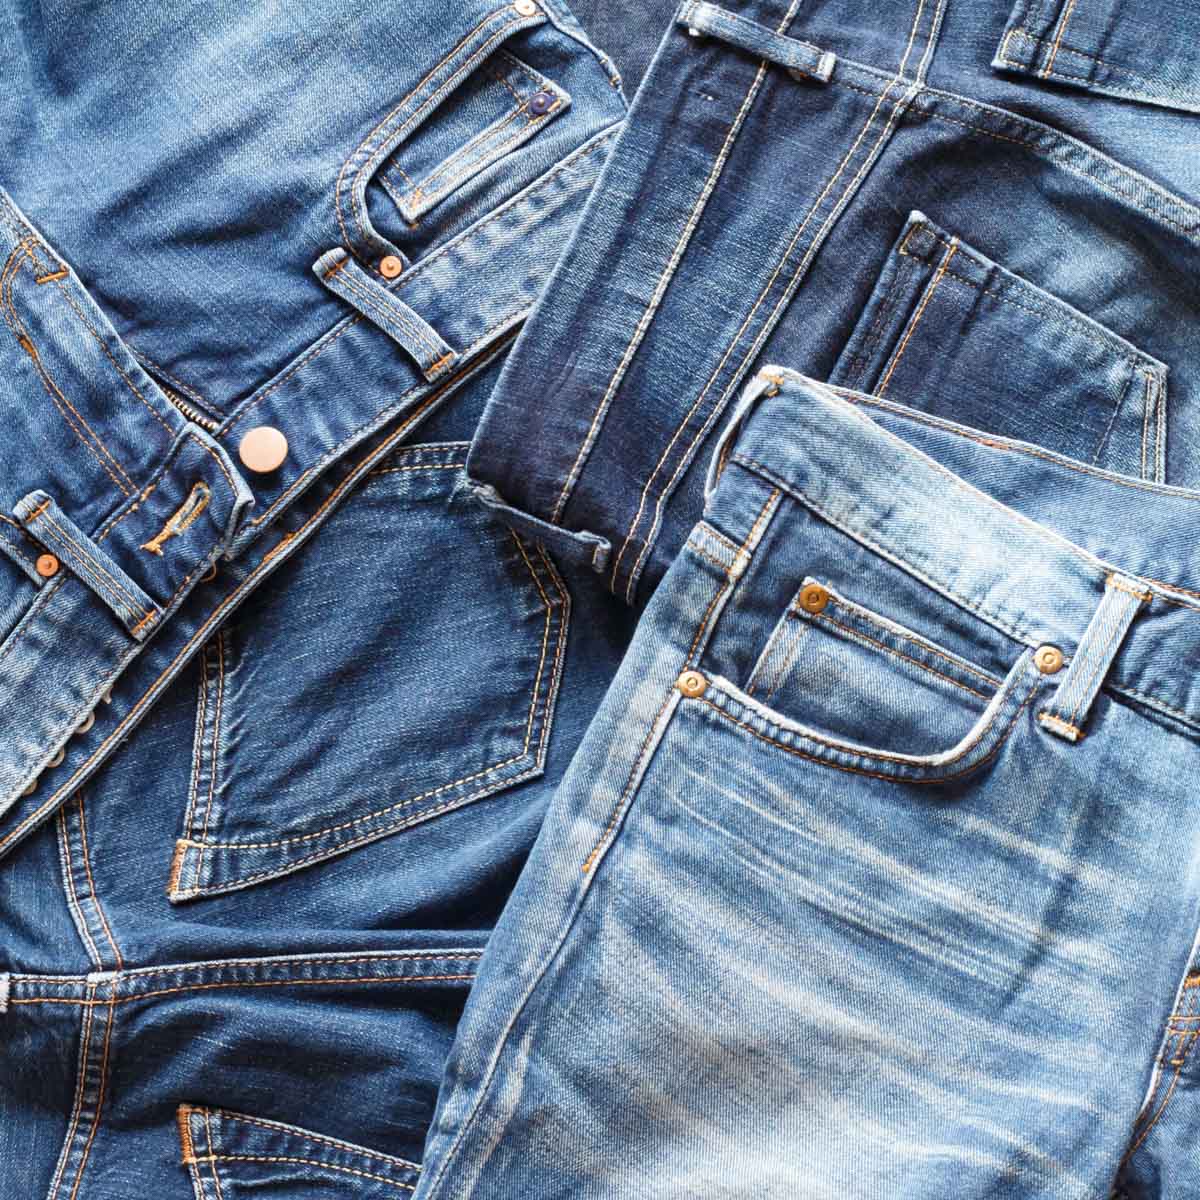 10-things-worth-buying-jeans-man-for-himself